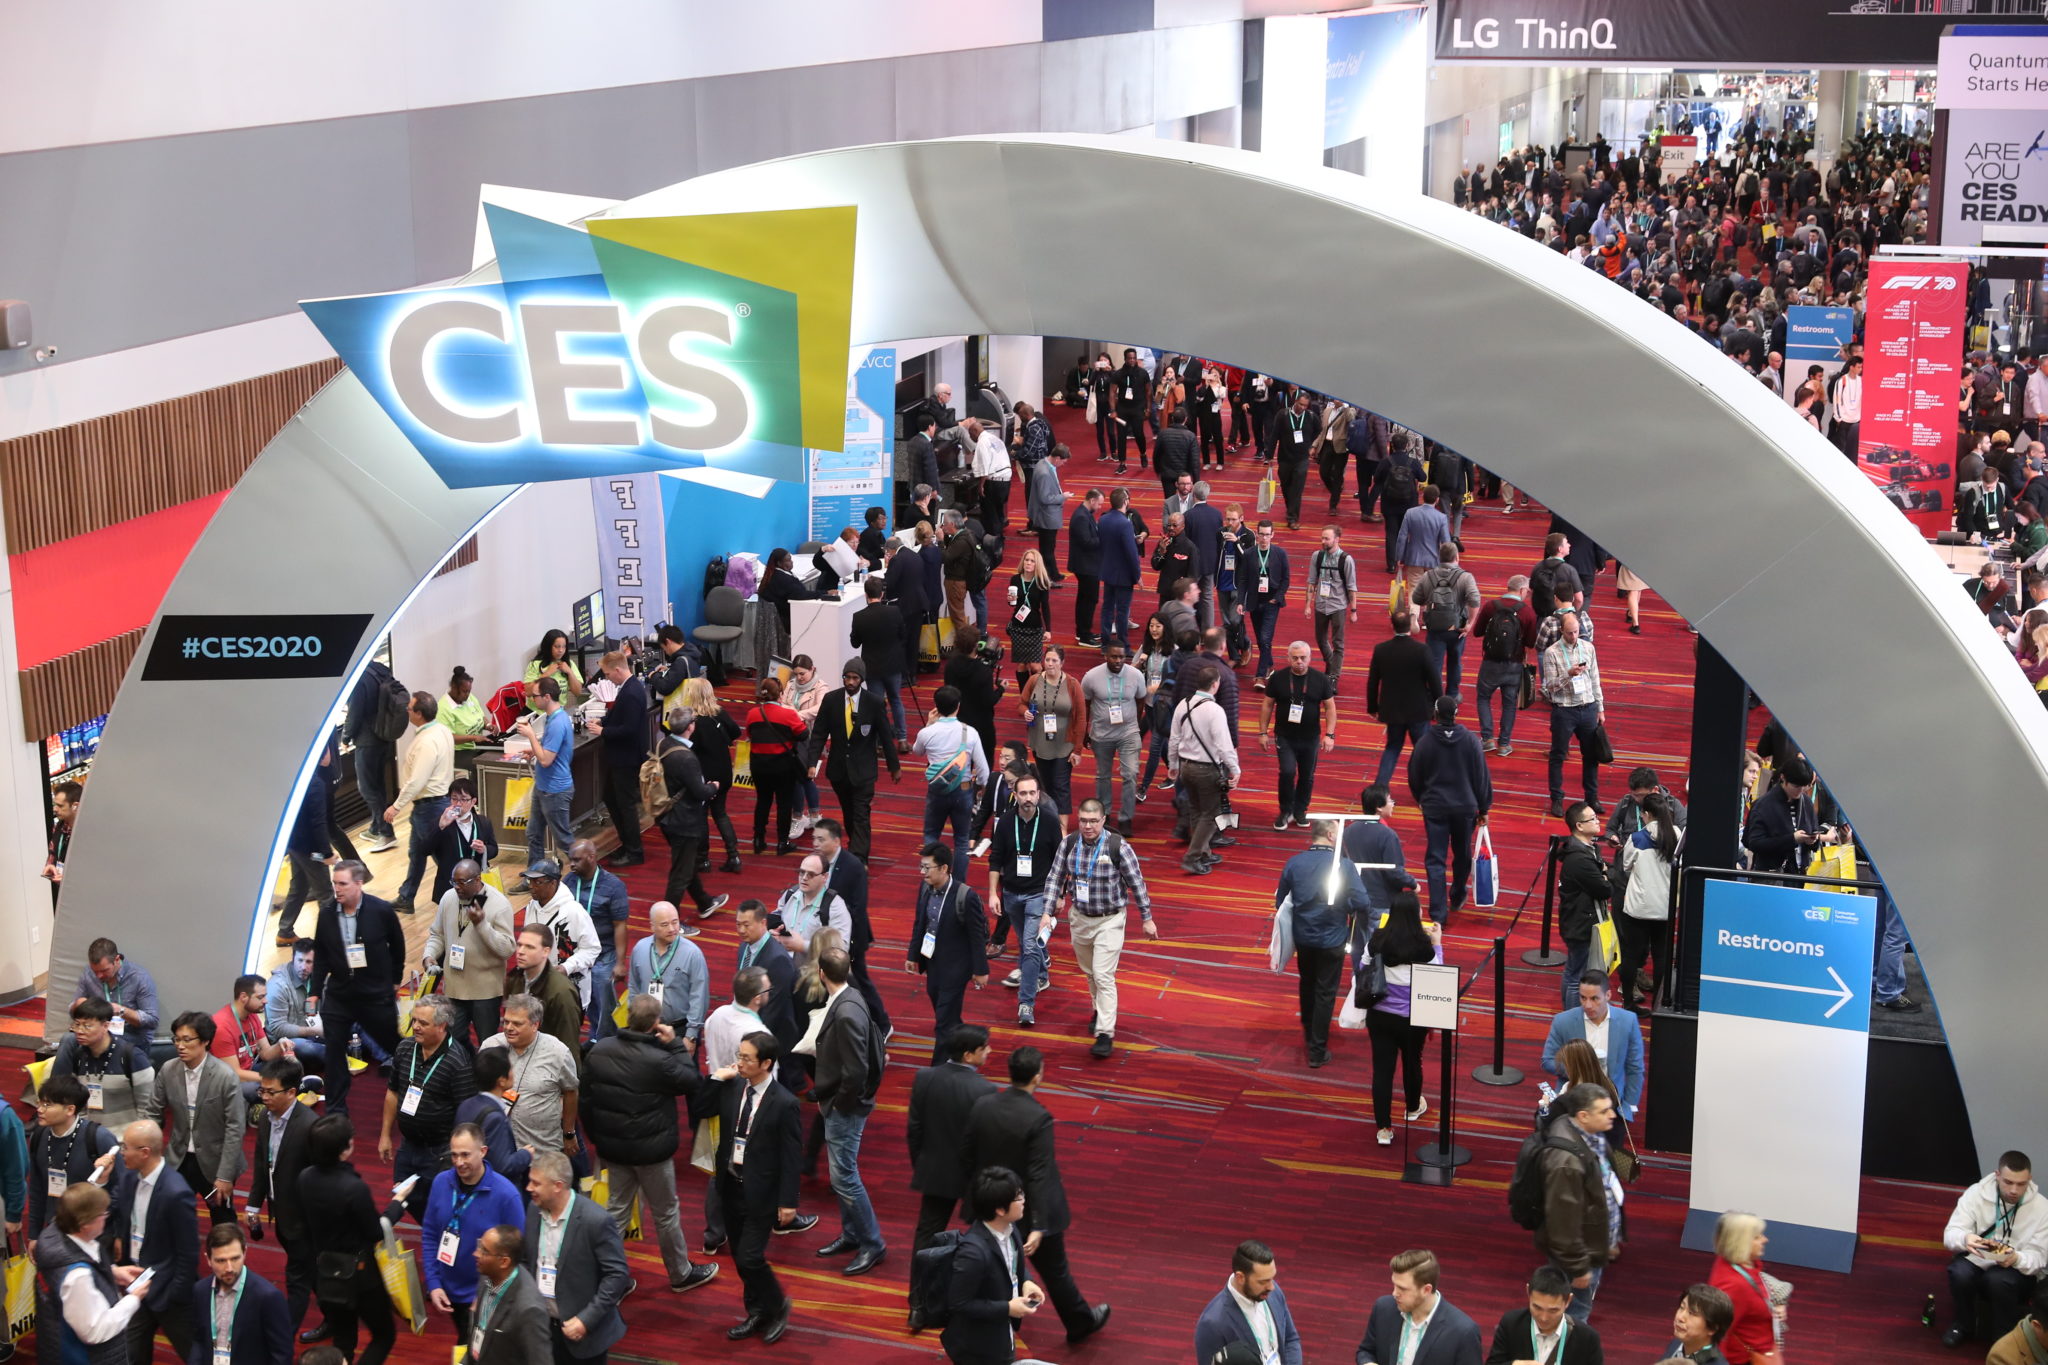 Read All Four Editions of the CES 2020 Show Daily